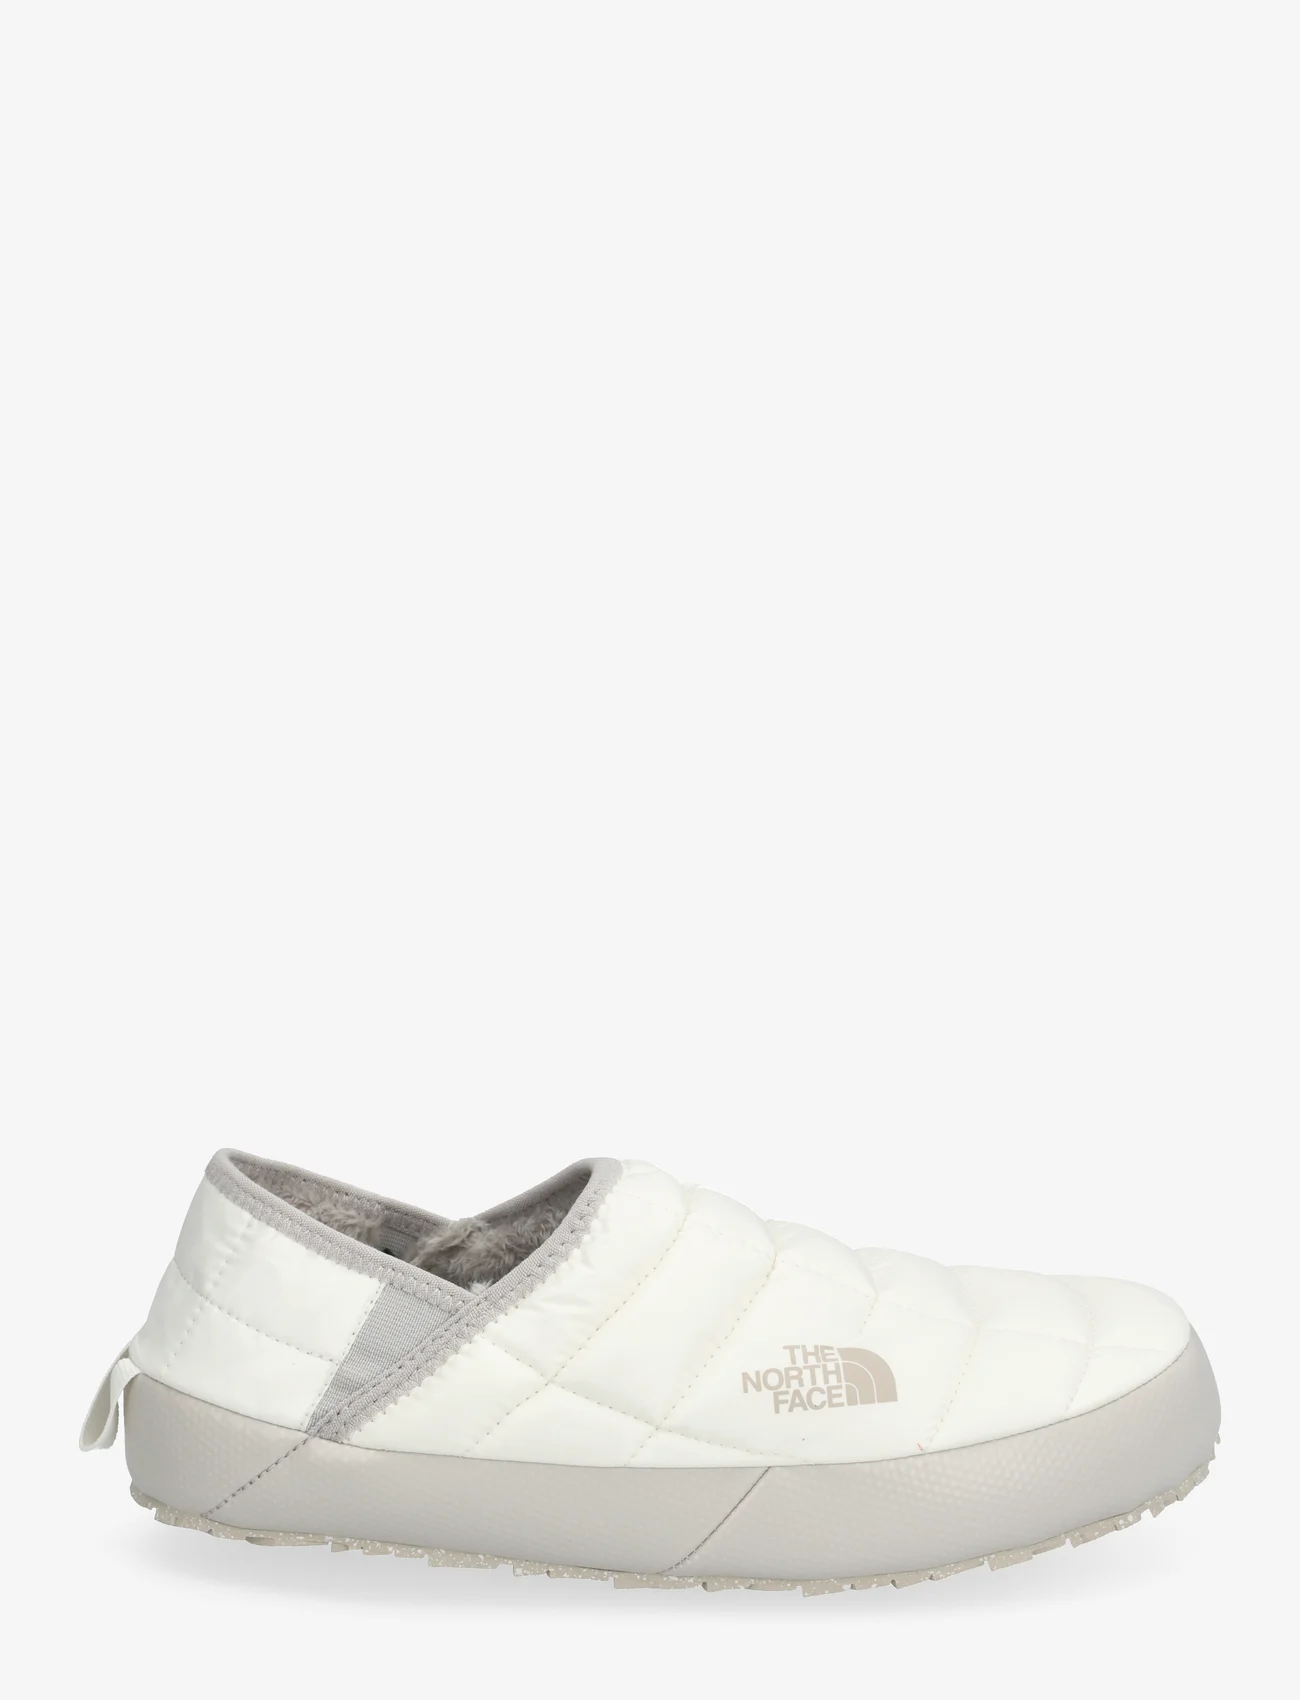 The North Face - W THERMOBALL TRACTION MULE V - baskets basses - gardenia white/silvergrey - 1